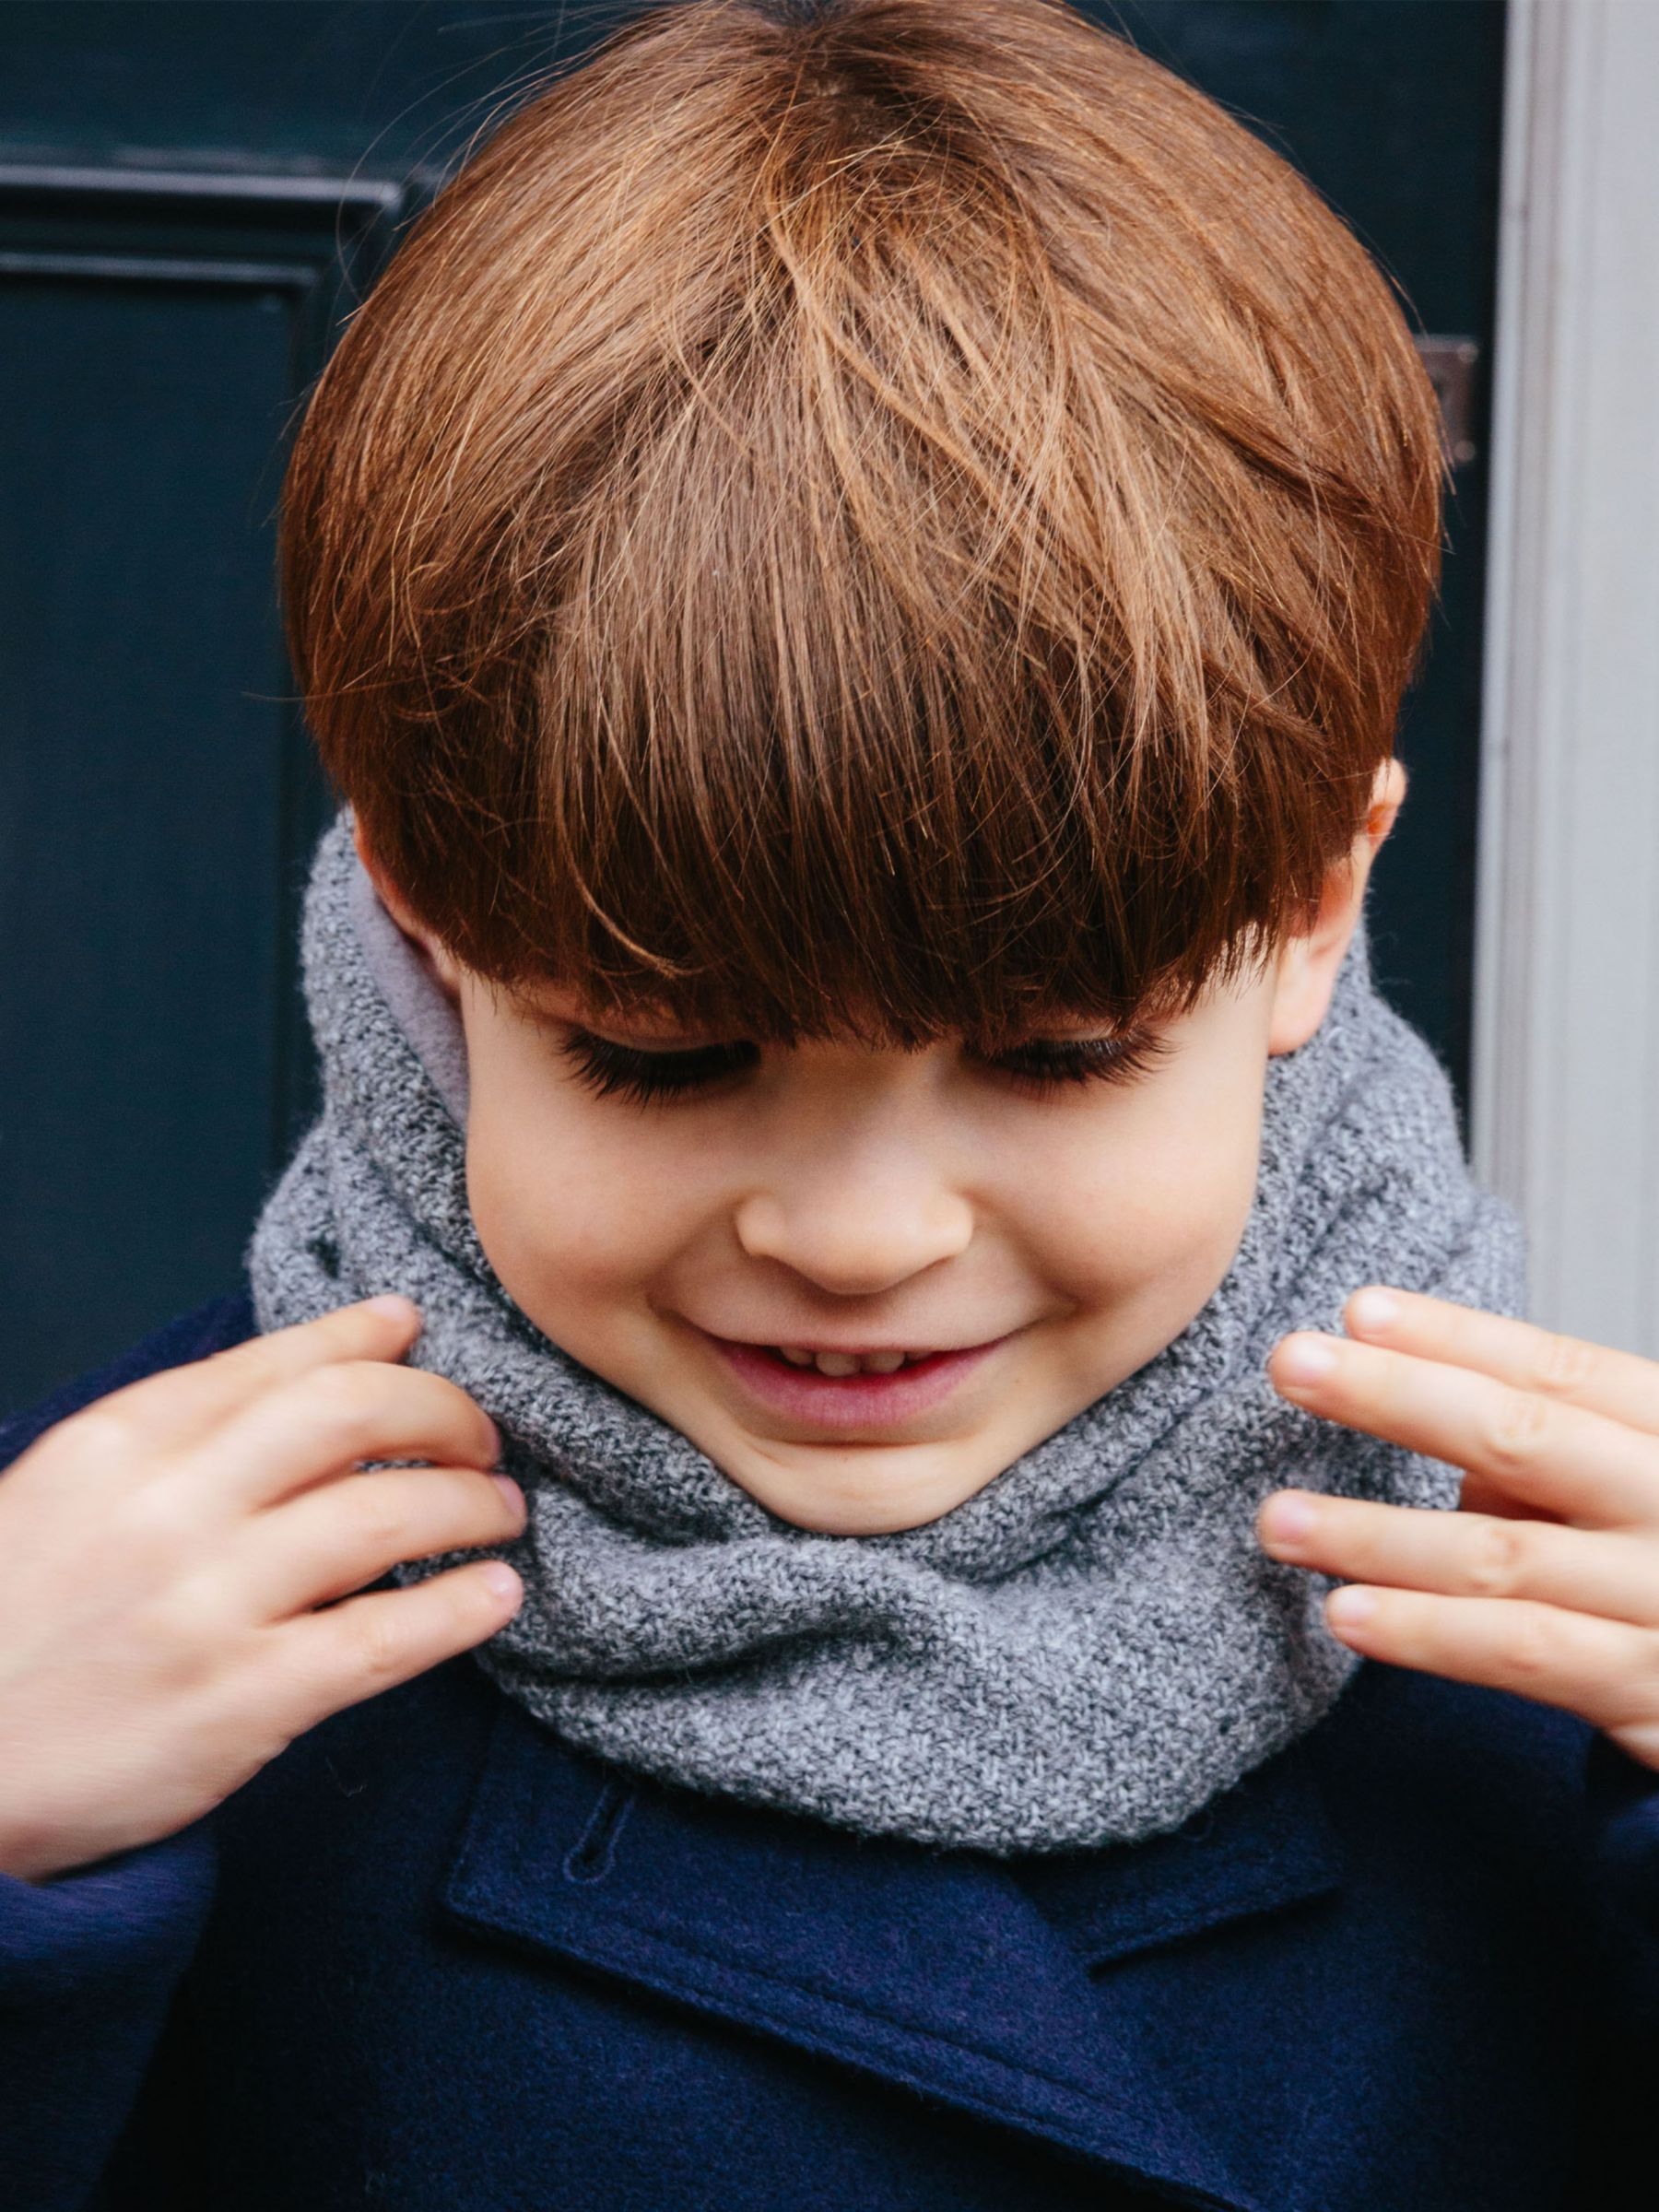 Buy Trotters Kids' Rice Stitch Wool/Cashmere Blend Snoody Online at johnlewis.com